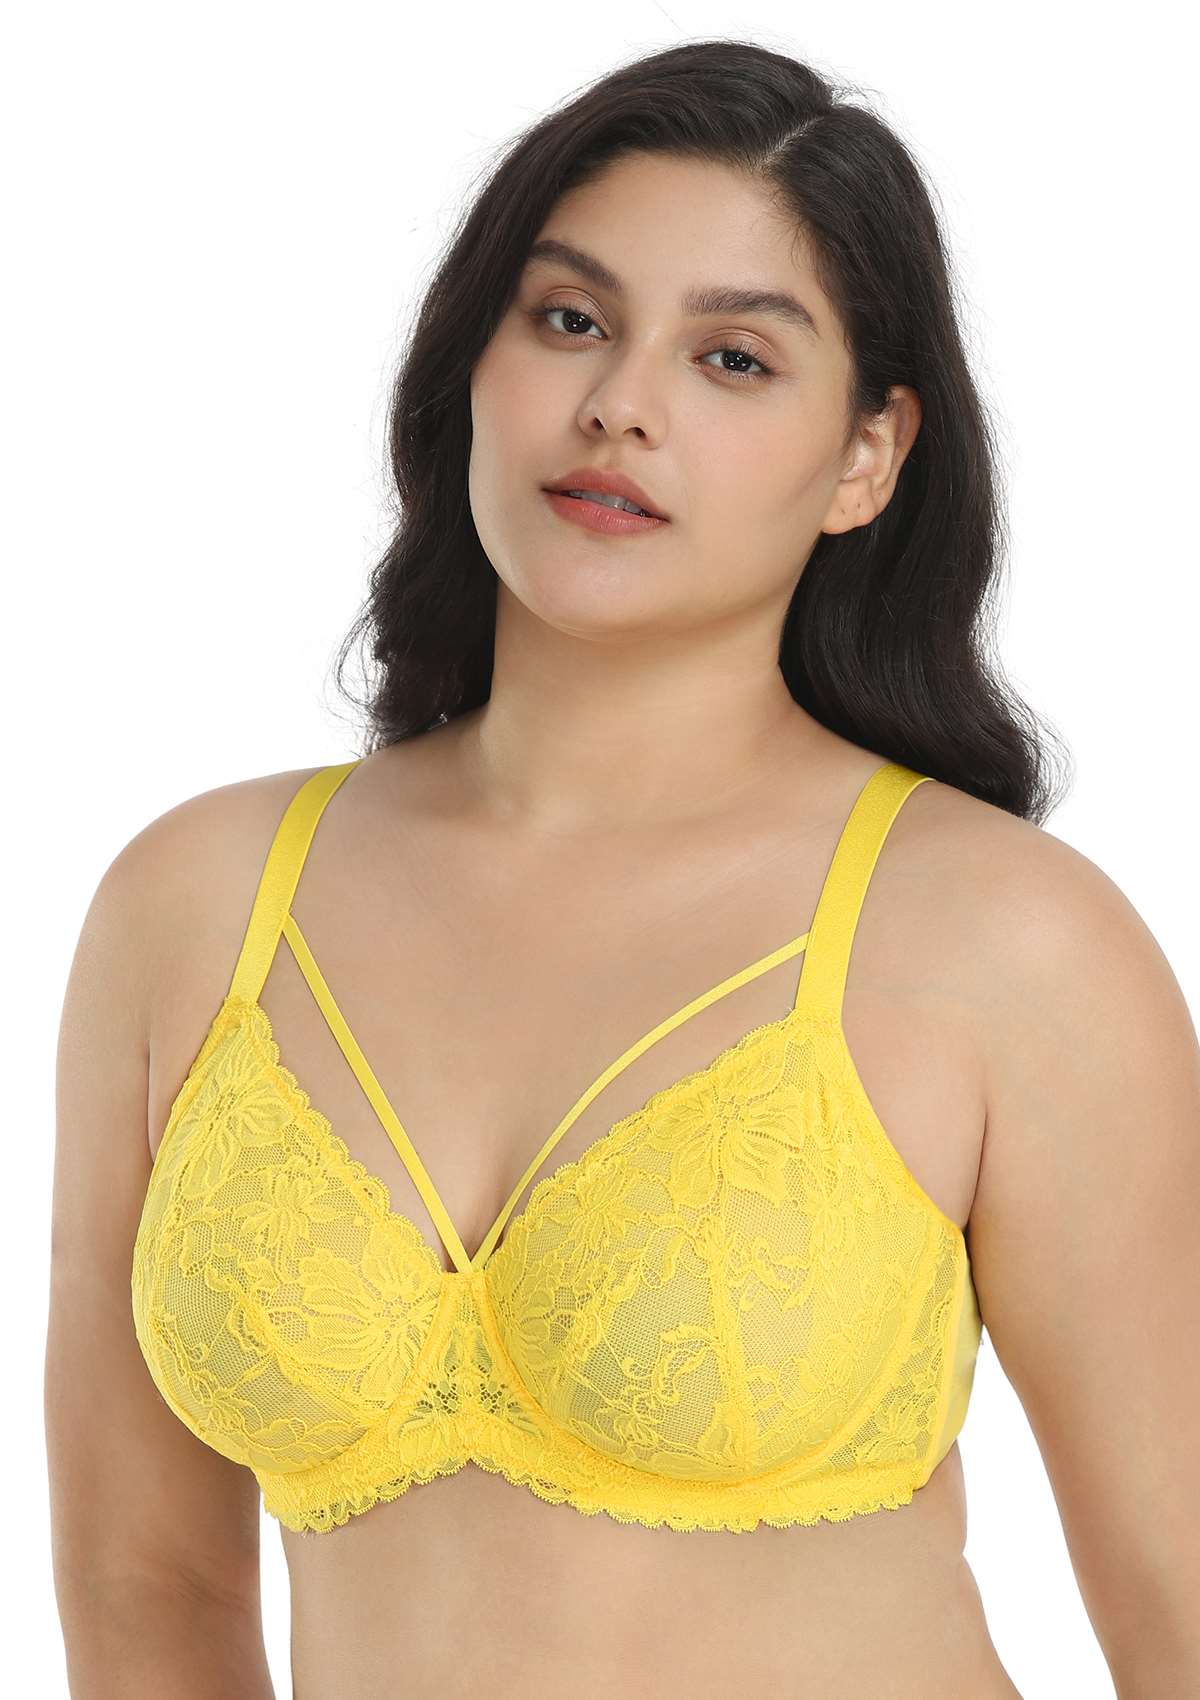 HSIA Unlined Lace Mesh Minimizer Bra For Large Breasts, Full Coverage - Bright Yellow / 36 / G